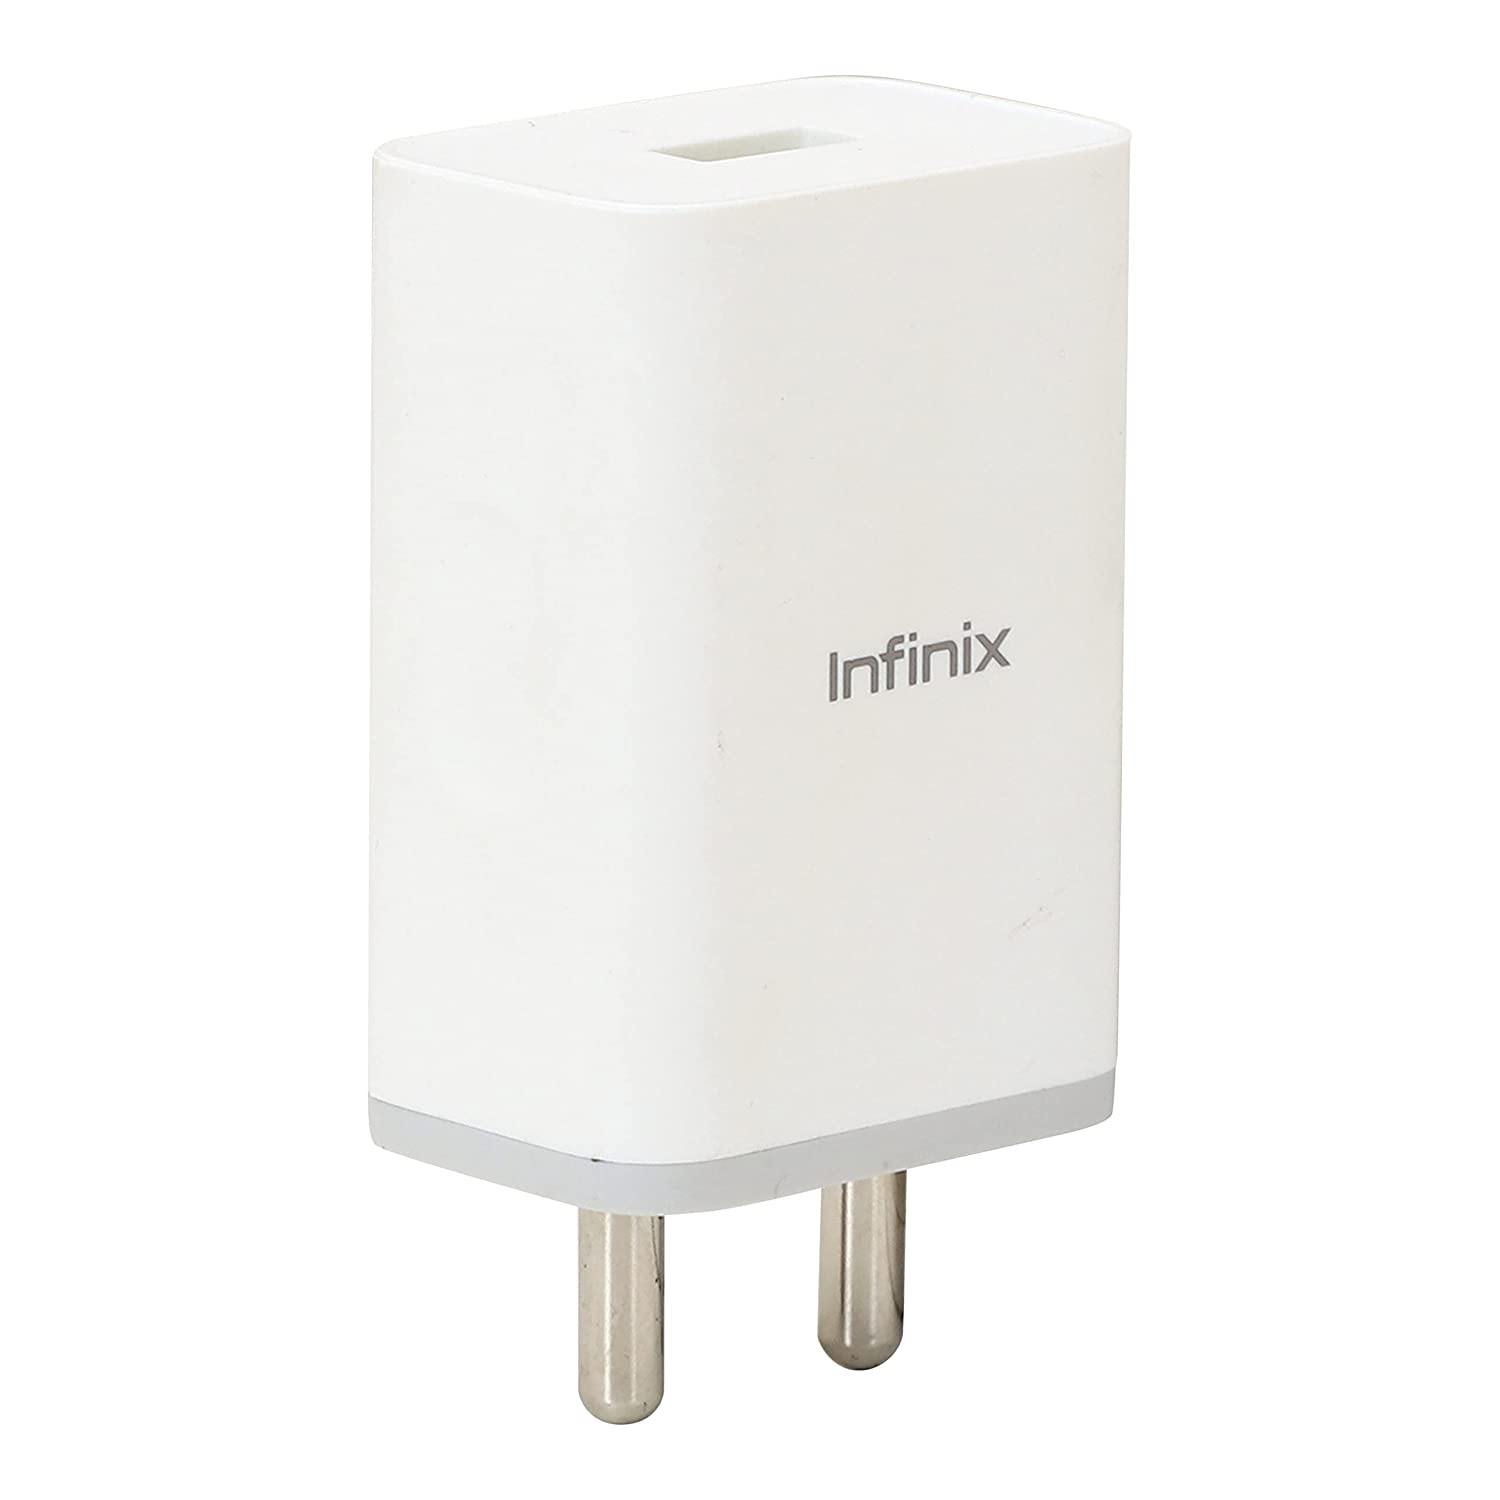 Infinix Model -U180XIA Mobile Charger Adaptor Only, Quick Charge ( Cable not included )